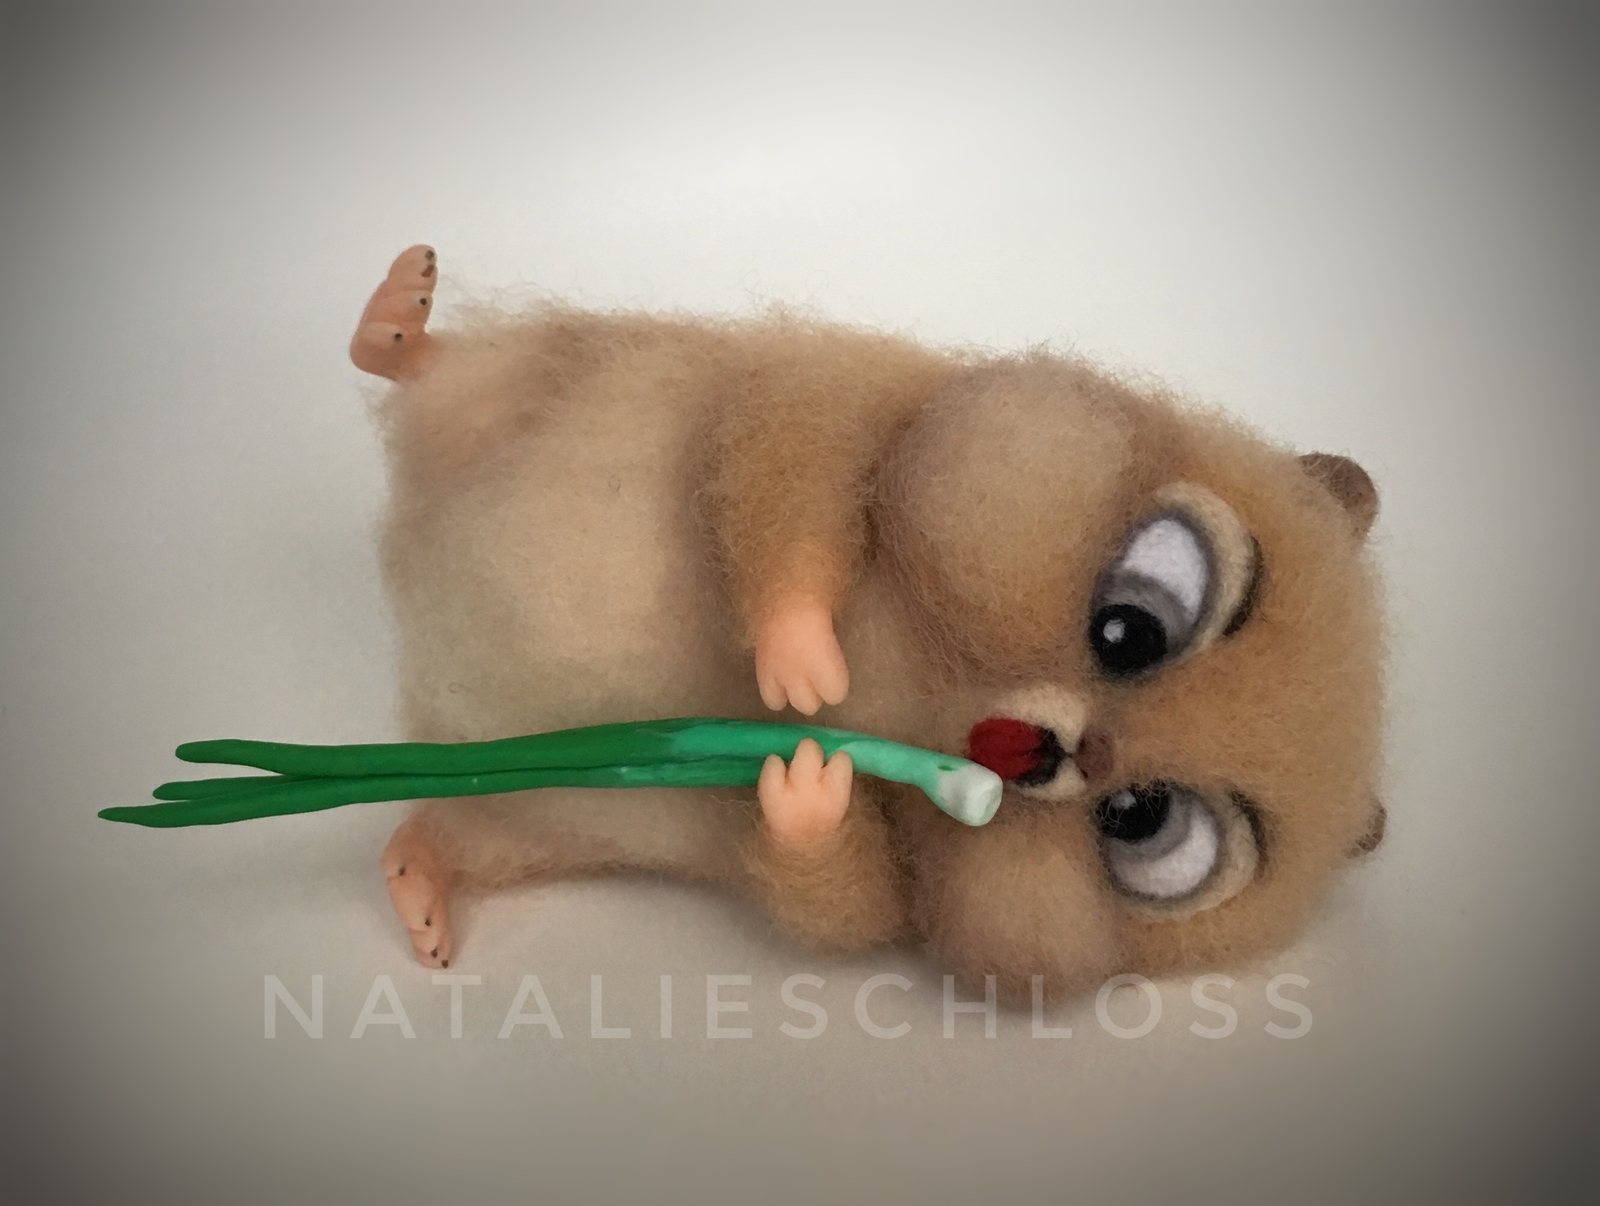 The same hamster. - My, Dry felting, Hamster, Hobby, Needlework without process